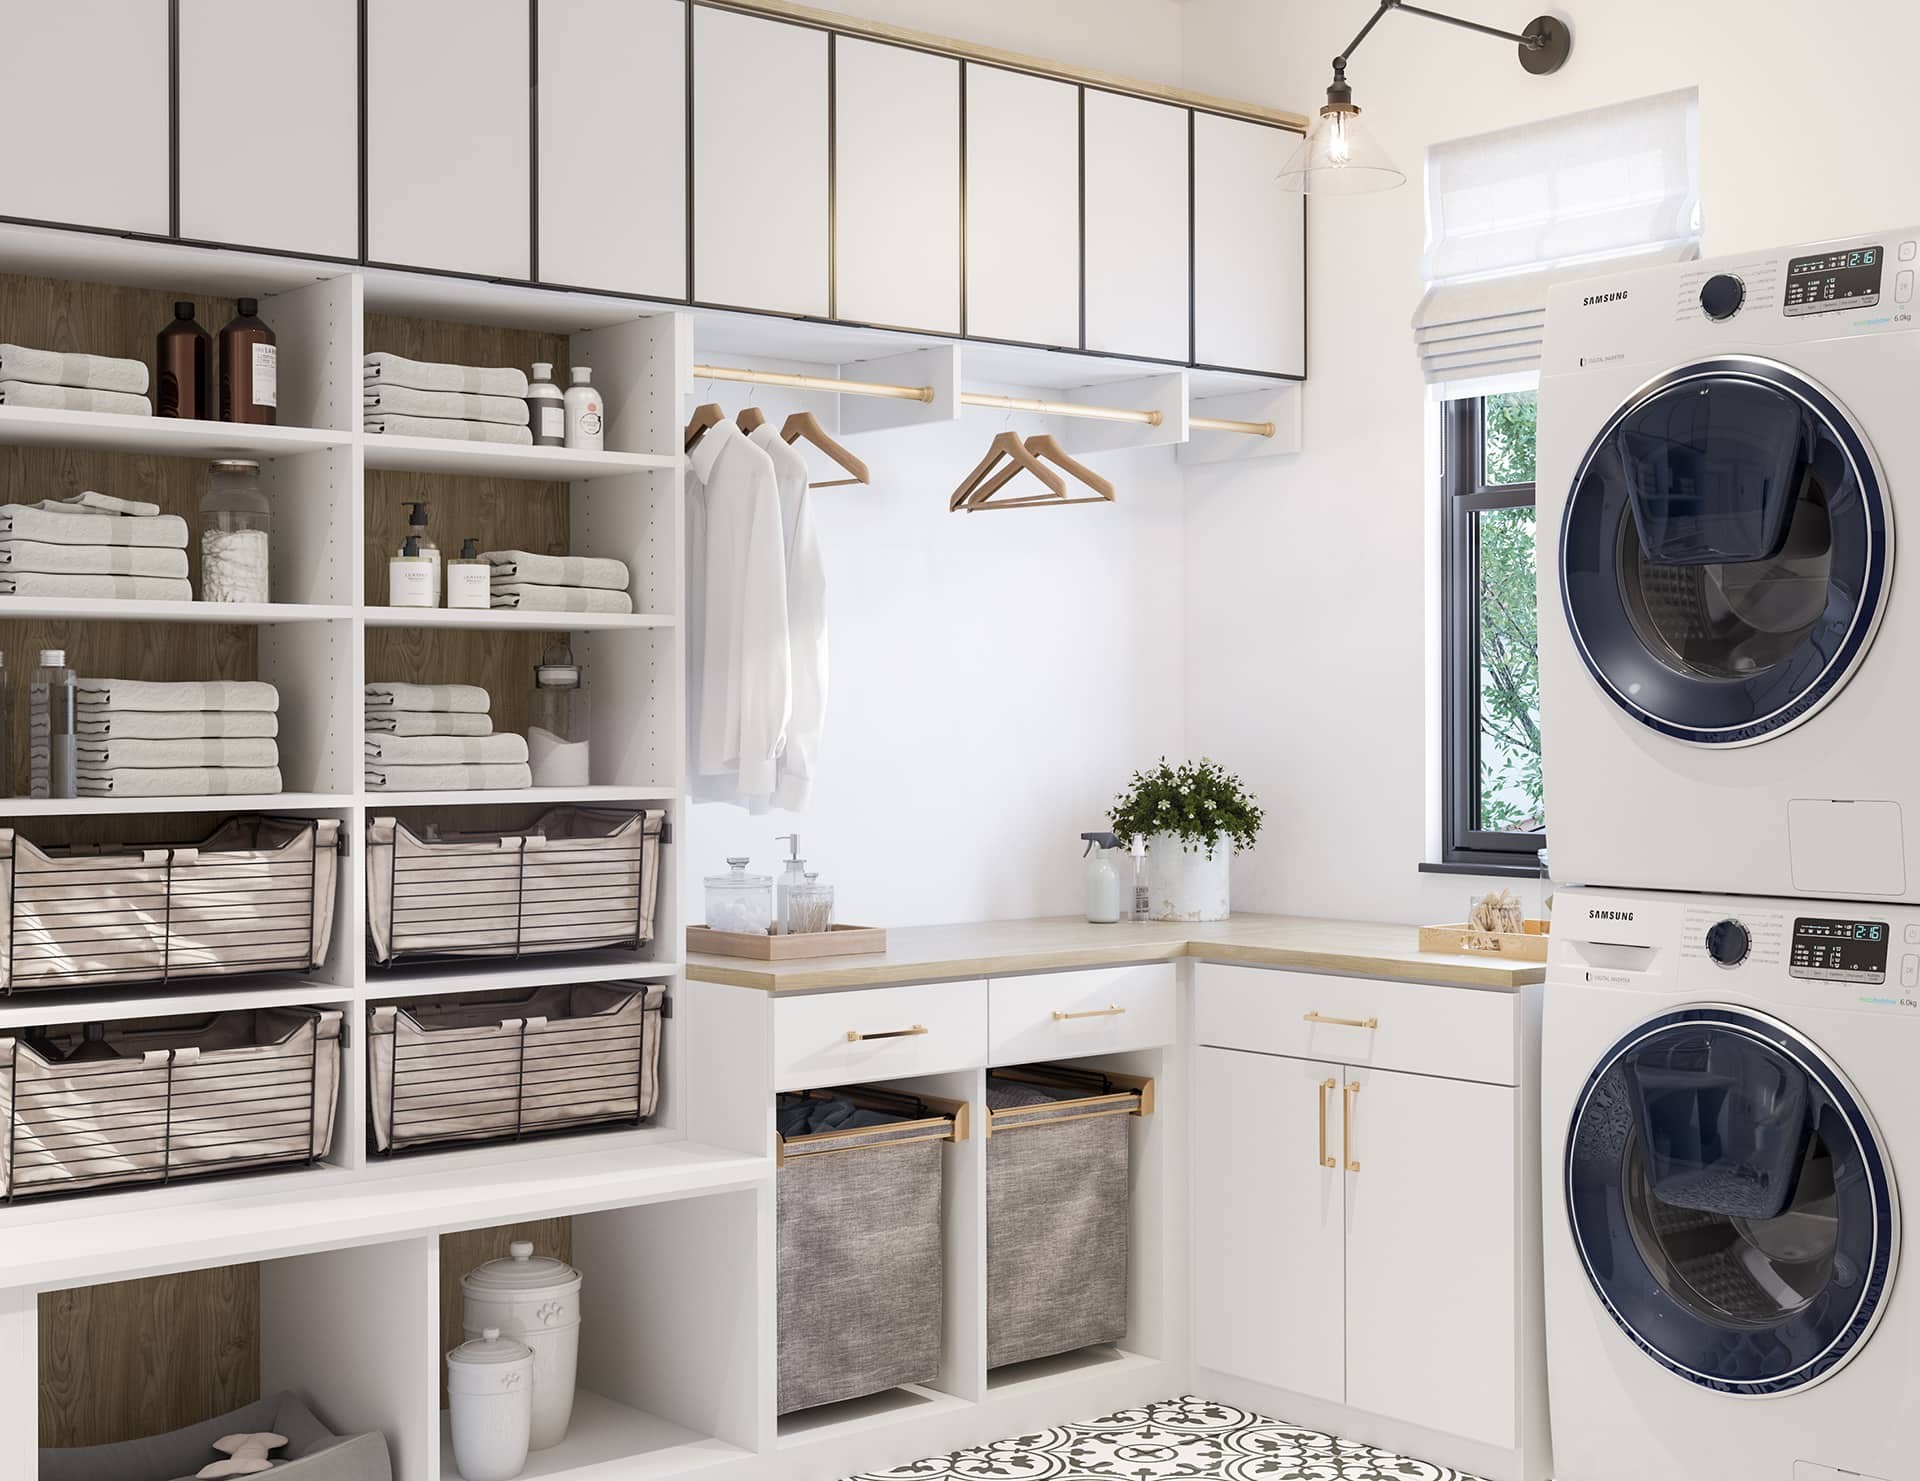 designer laundry room with feature light and tiled floor organised open shelves